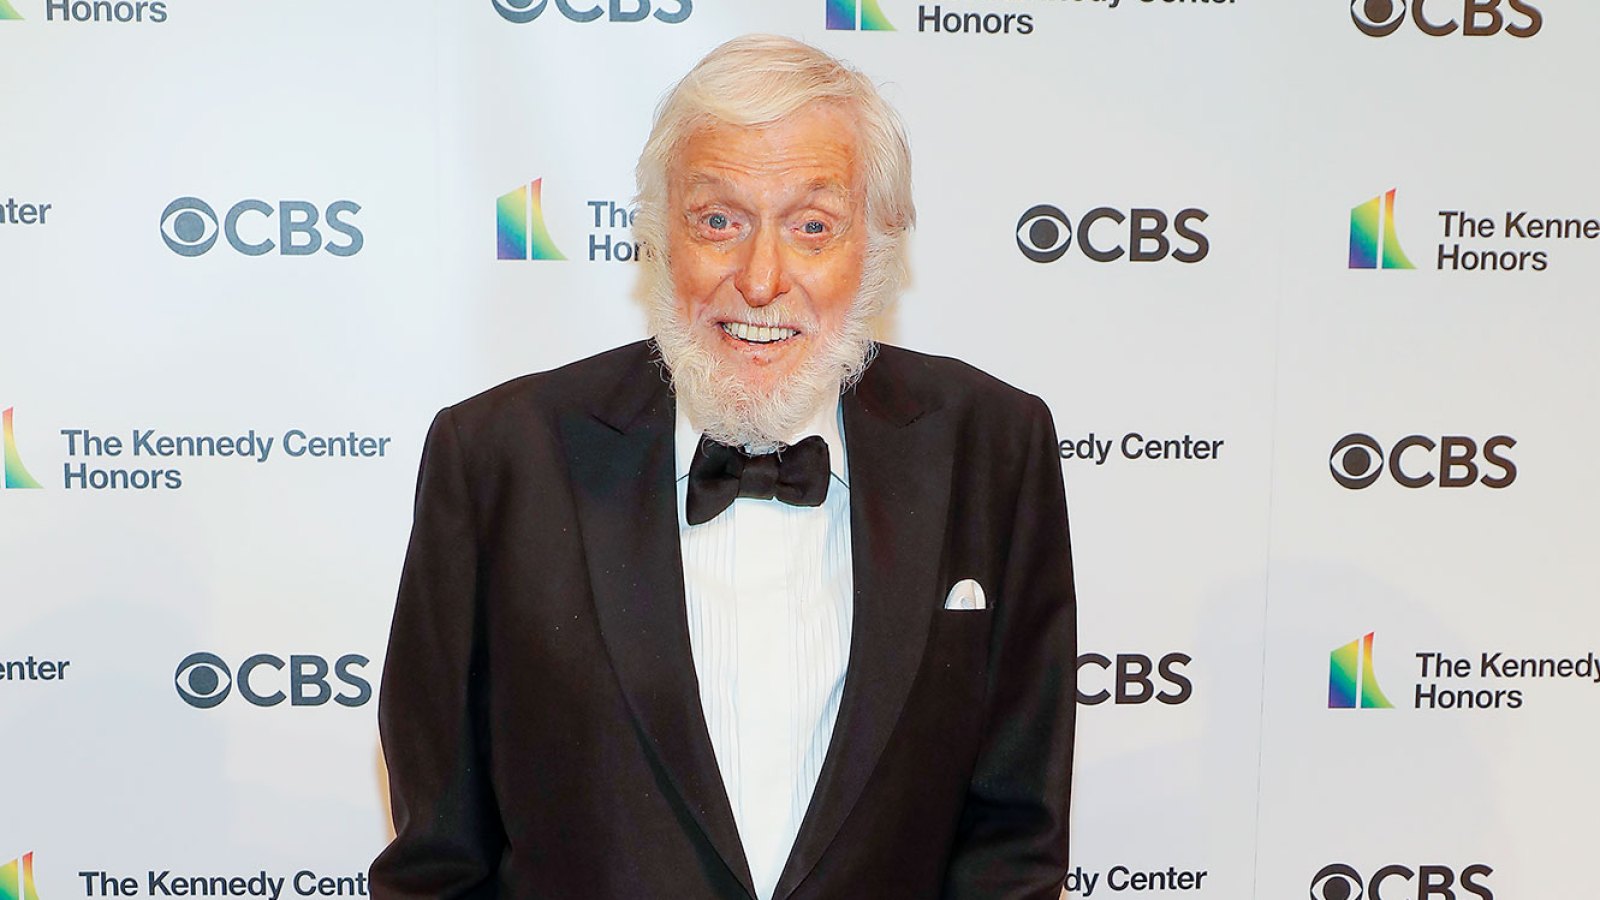 Dick Van Dyke Admits to Being Pretty Lazy When Looking For Work